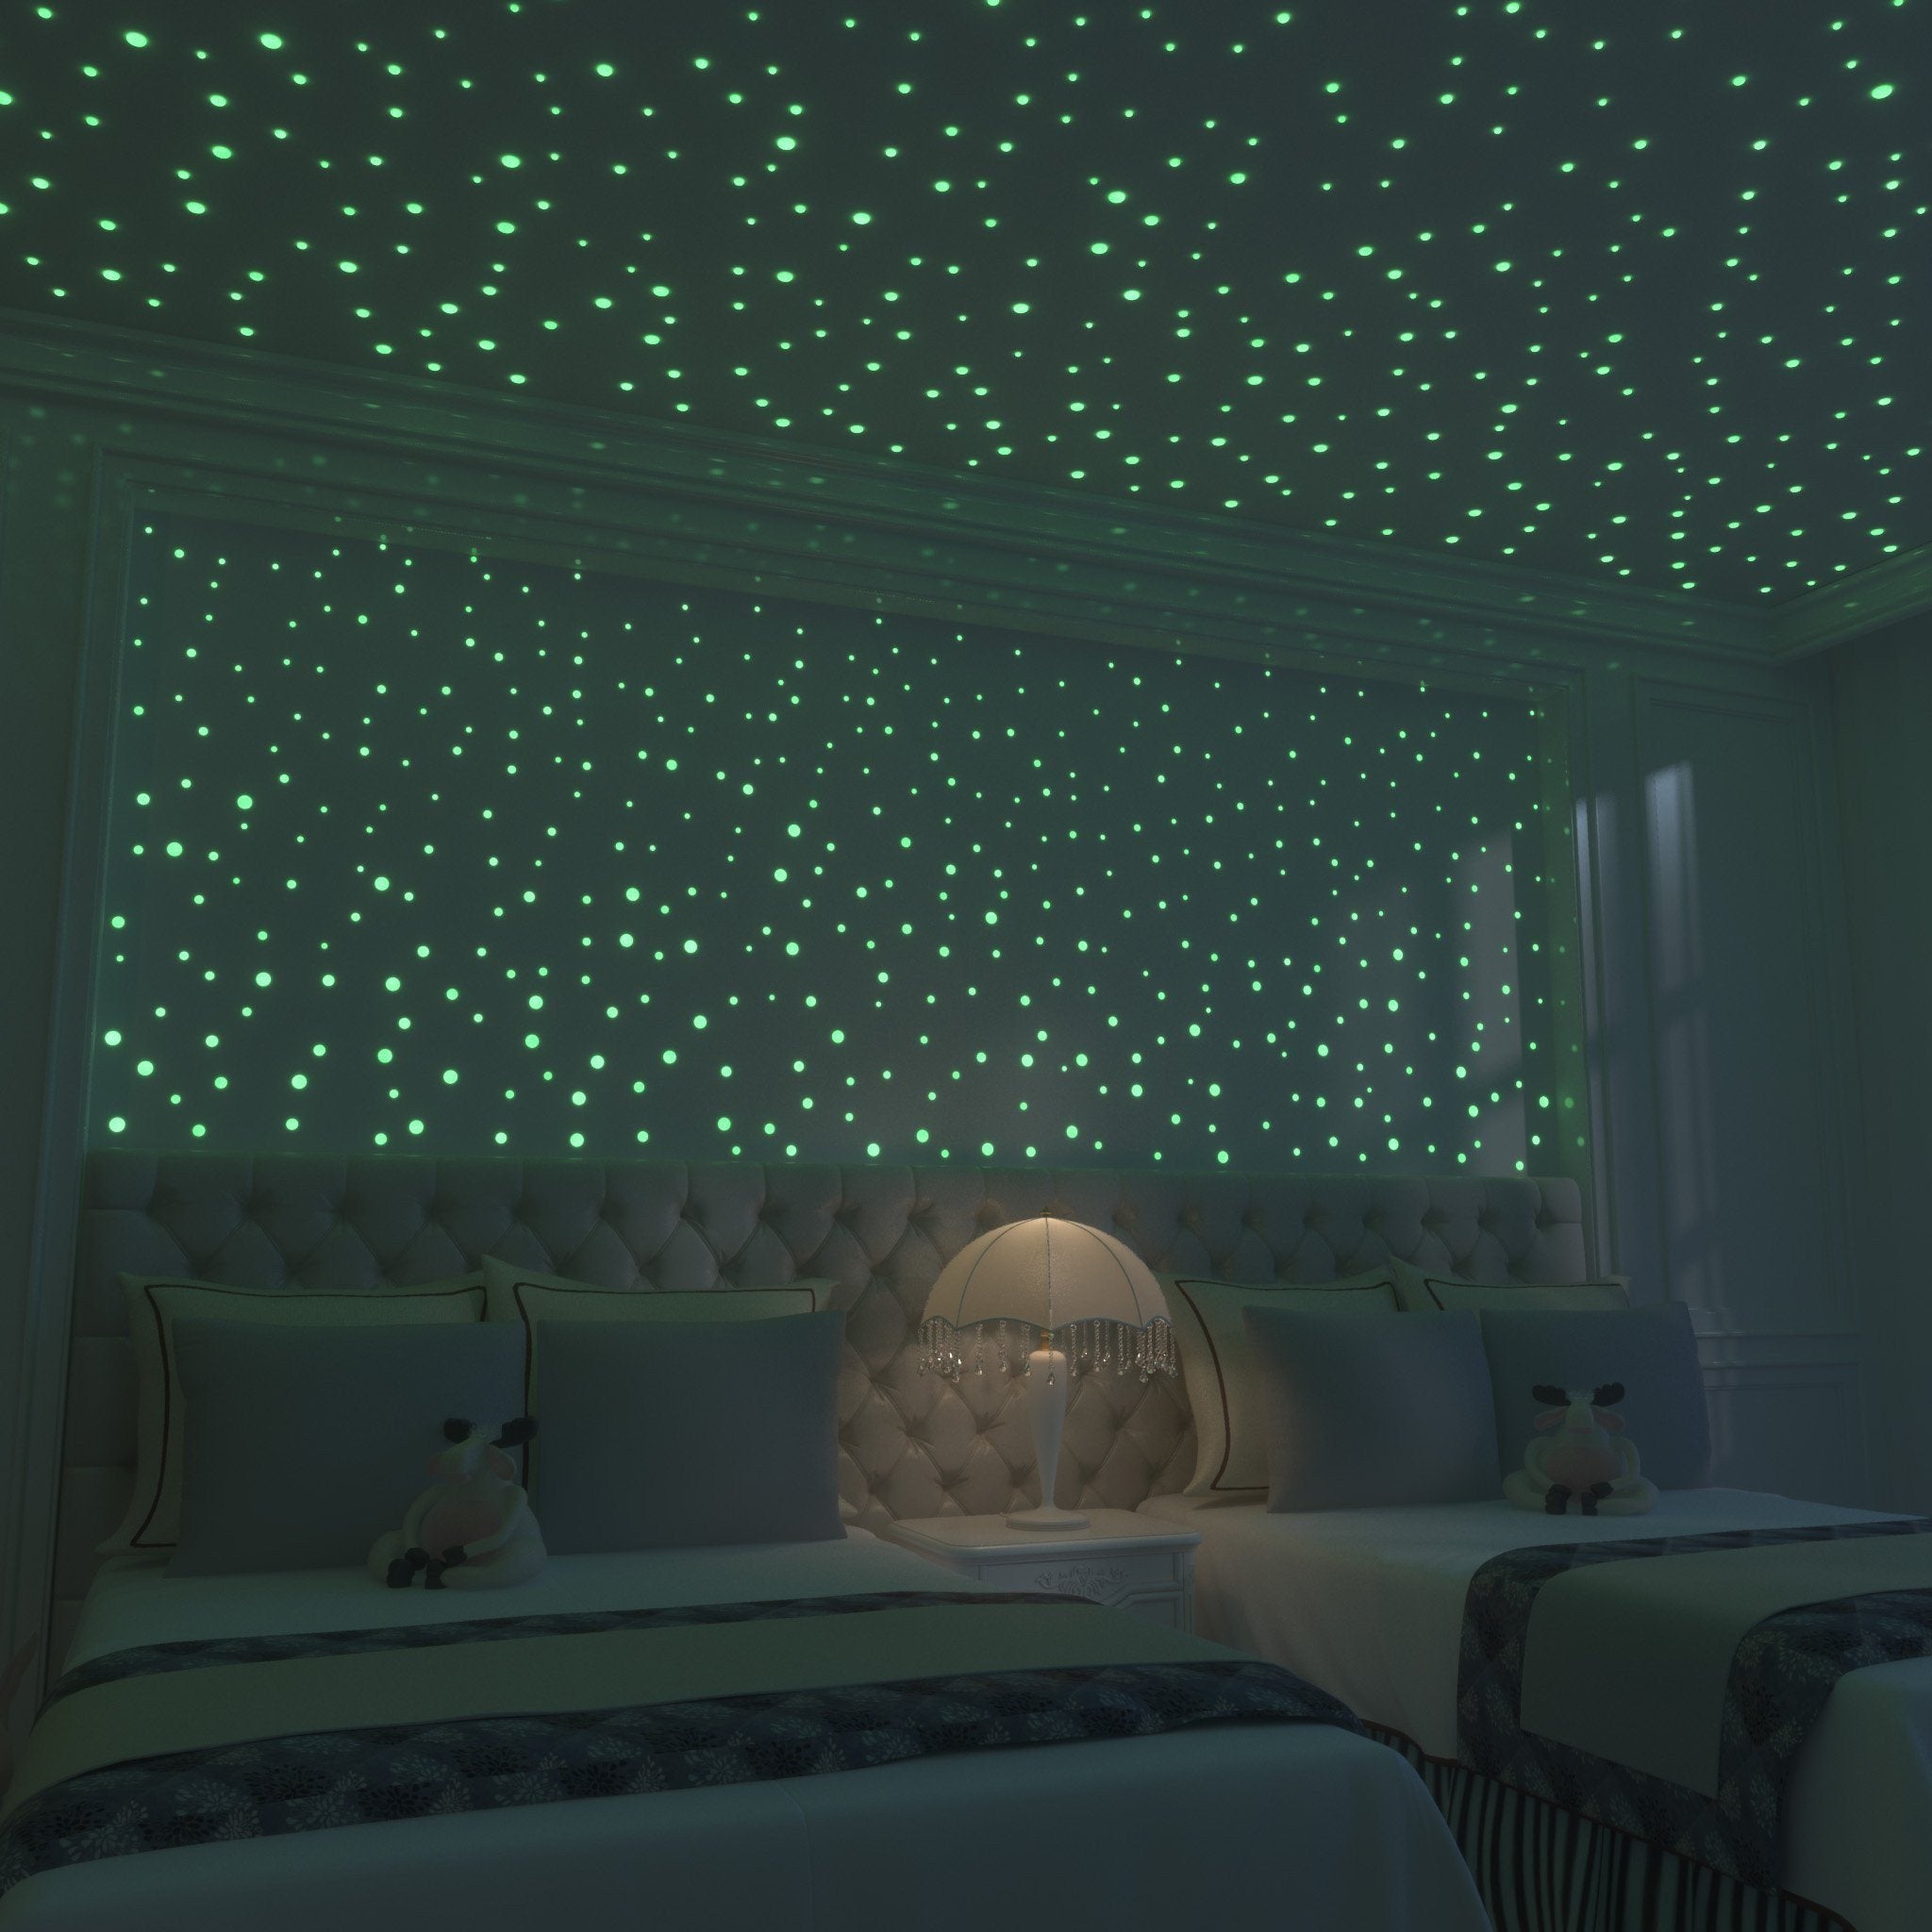  Glow  In The Dark  Stars  824 Realistic 3D Stars  For Ceiling  